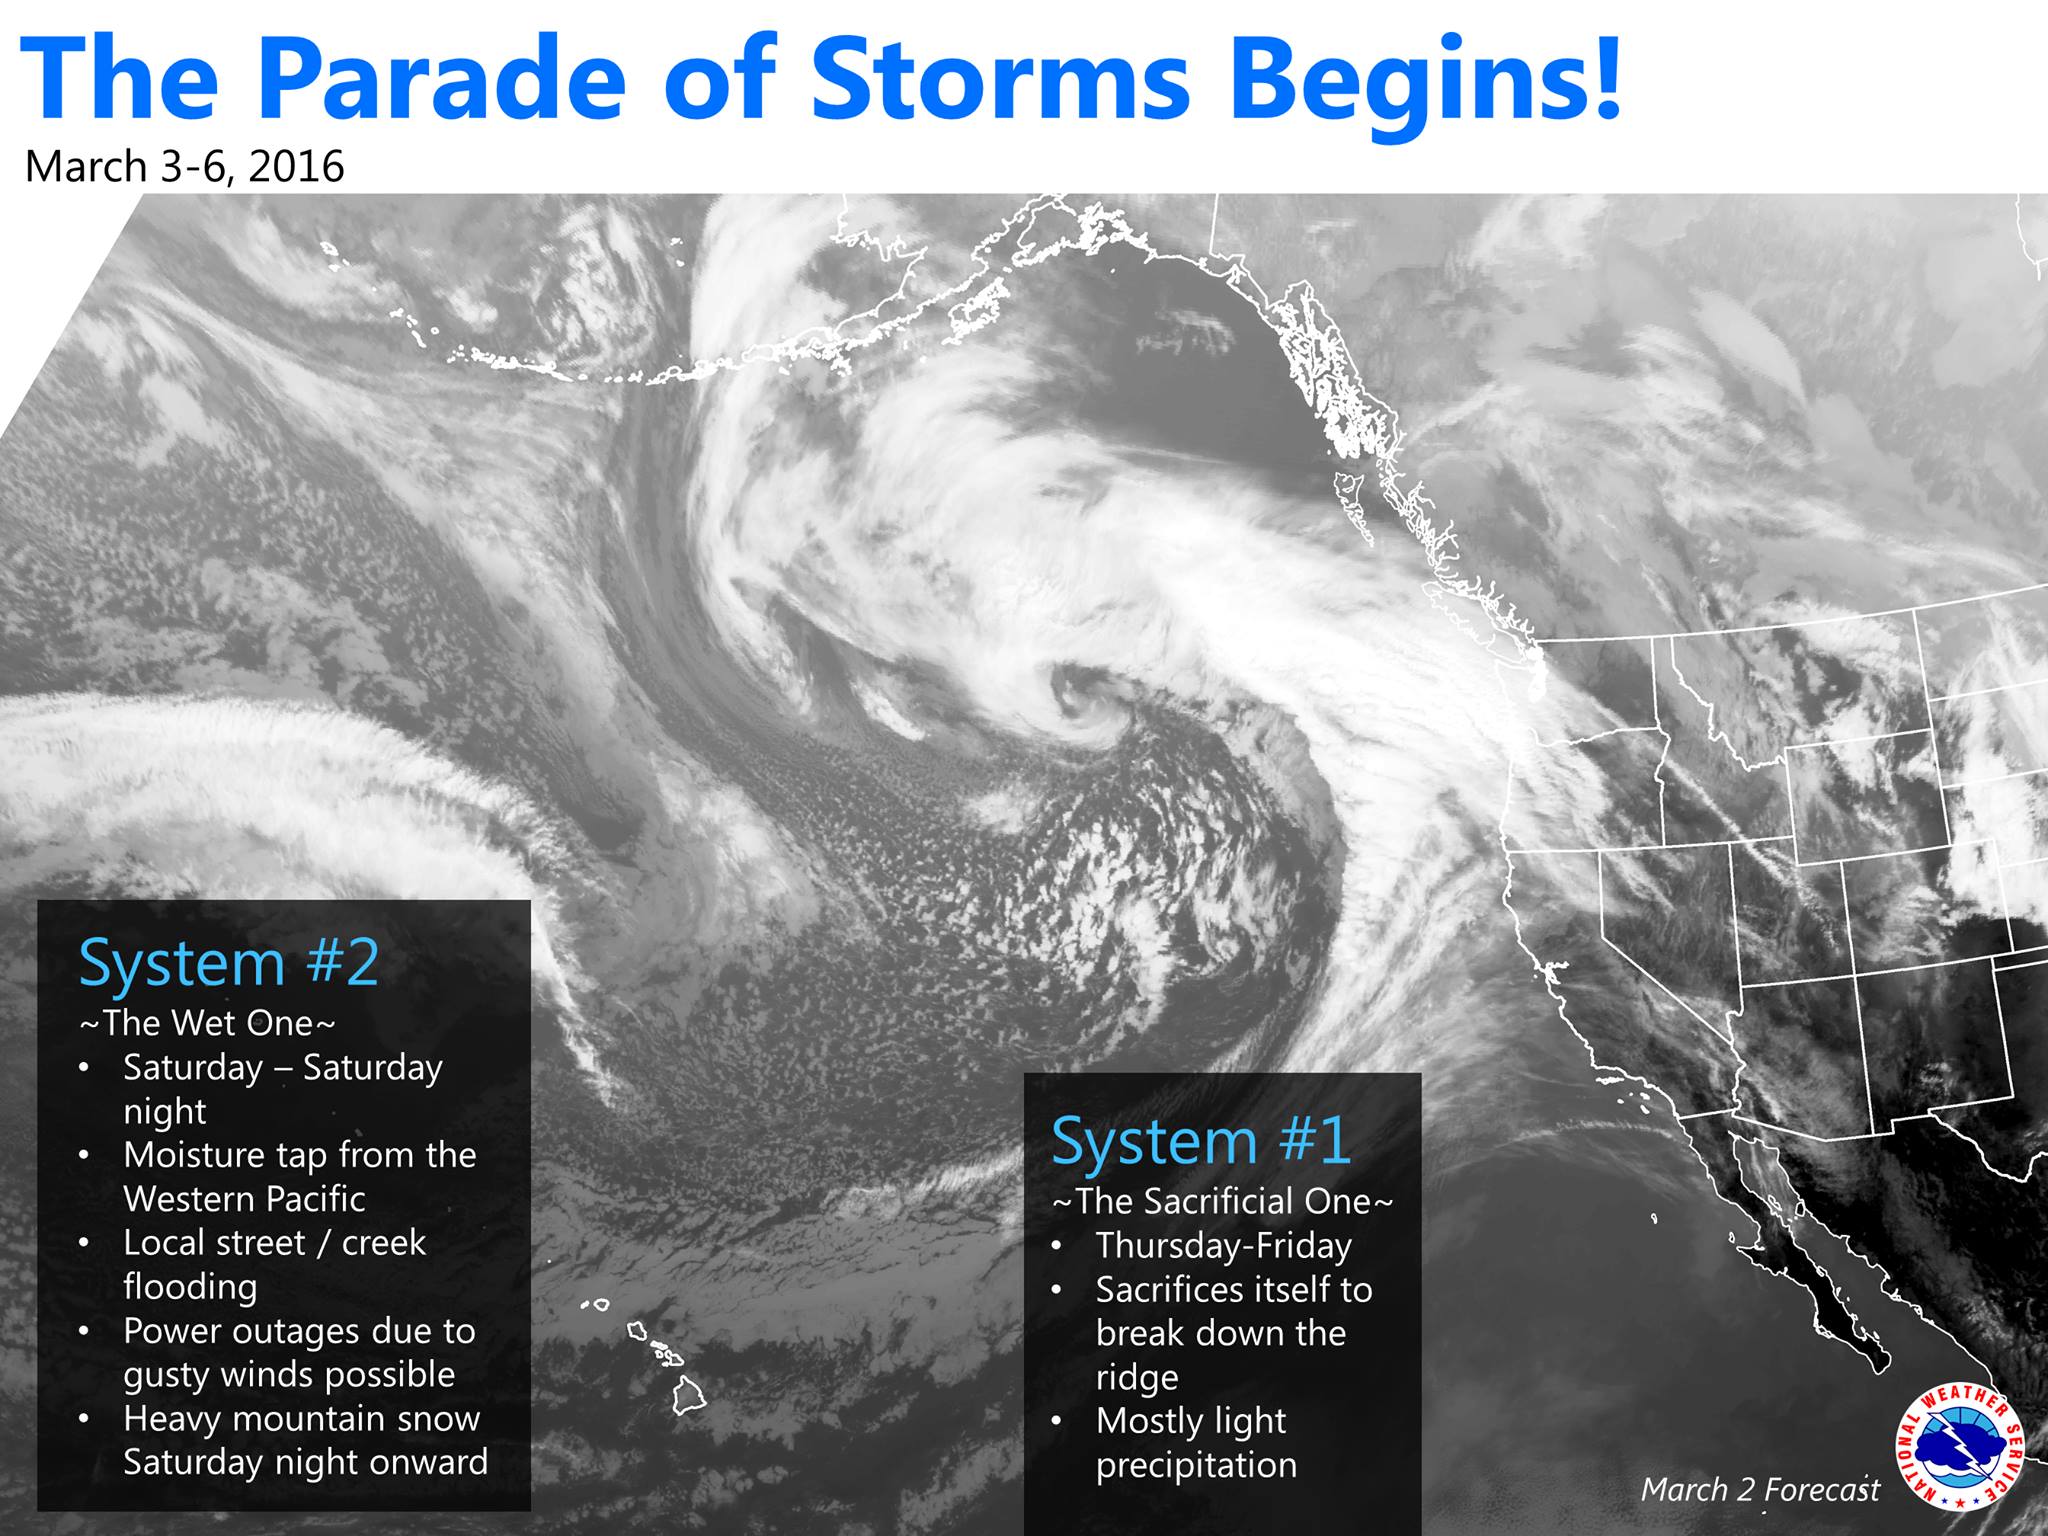 "The first in a long series of weather systems will arrive in Northern California tomorrow. This system basically sacrifices itself to break down California's persistent ridge of high pressure, but will clear the way for a much wetter storm on Saturday!" - NOAA Sacramento, CA today